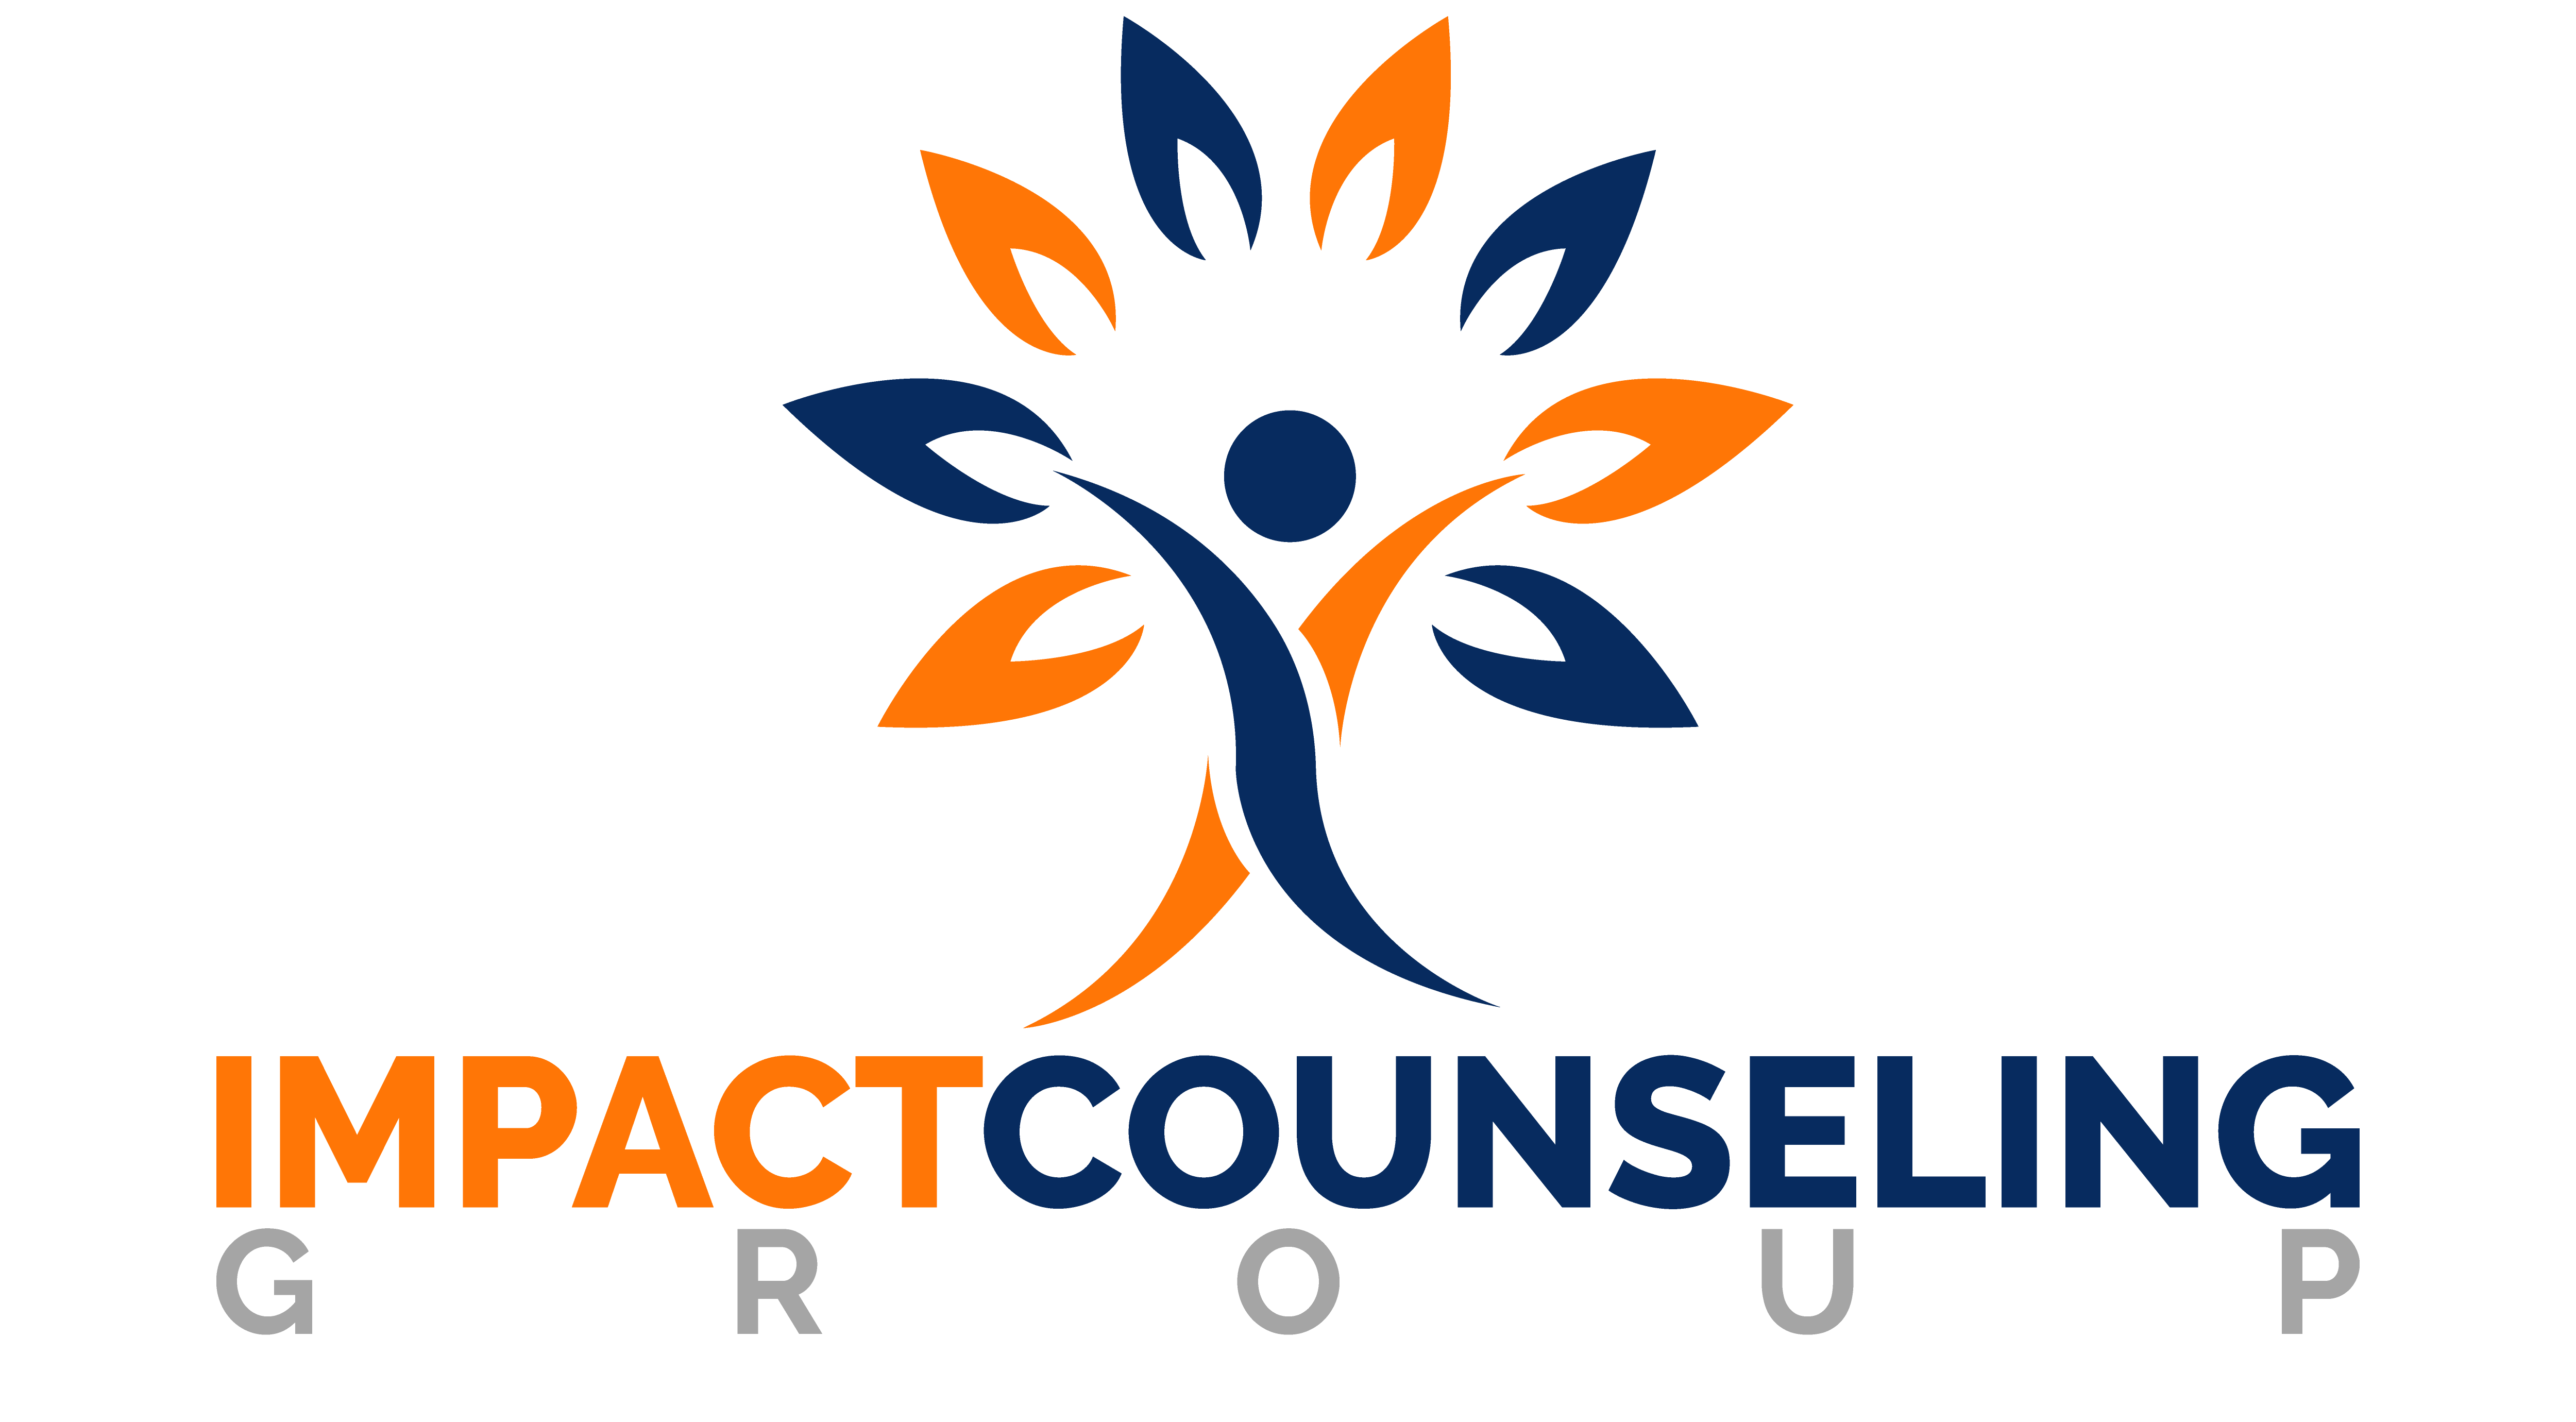 Impact Counseling Group